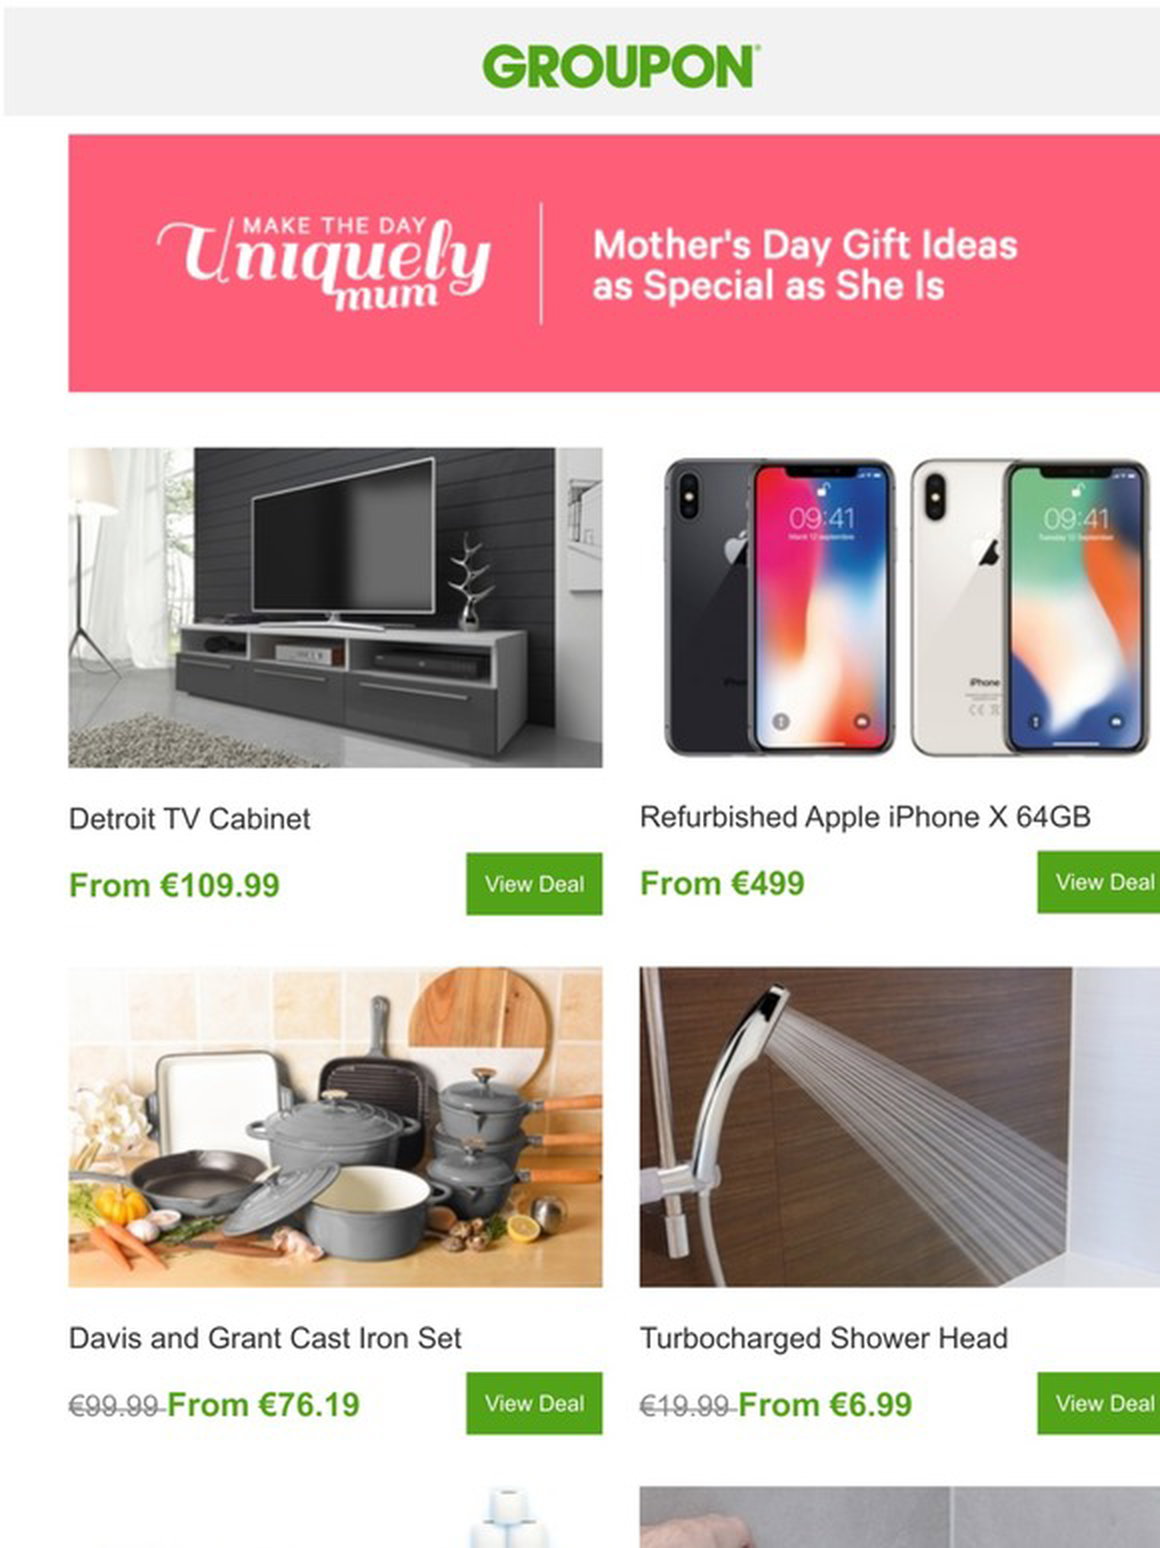 Groupon Ireland Email Newsletters Shop Sales Discounts And